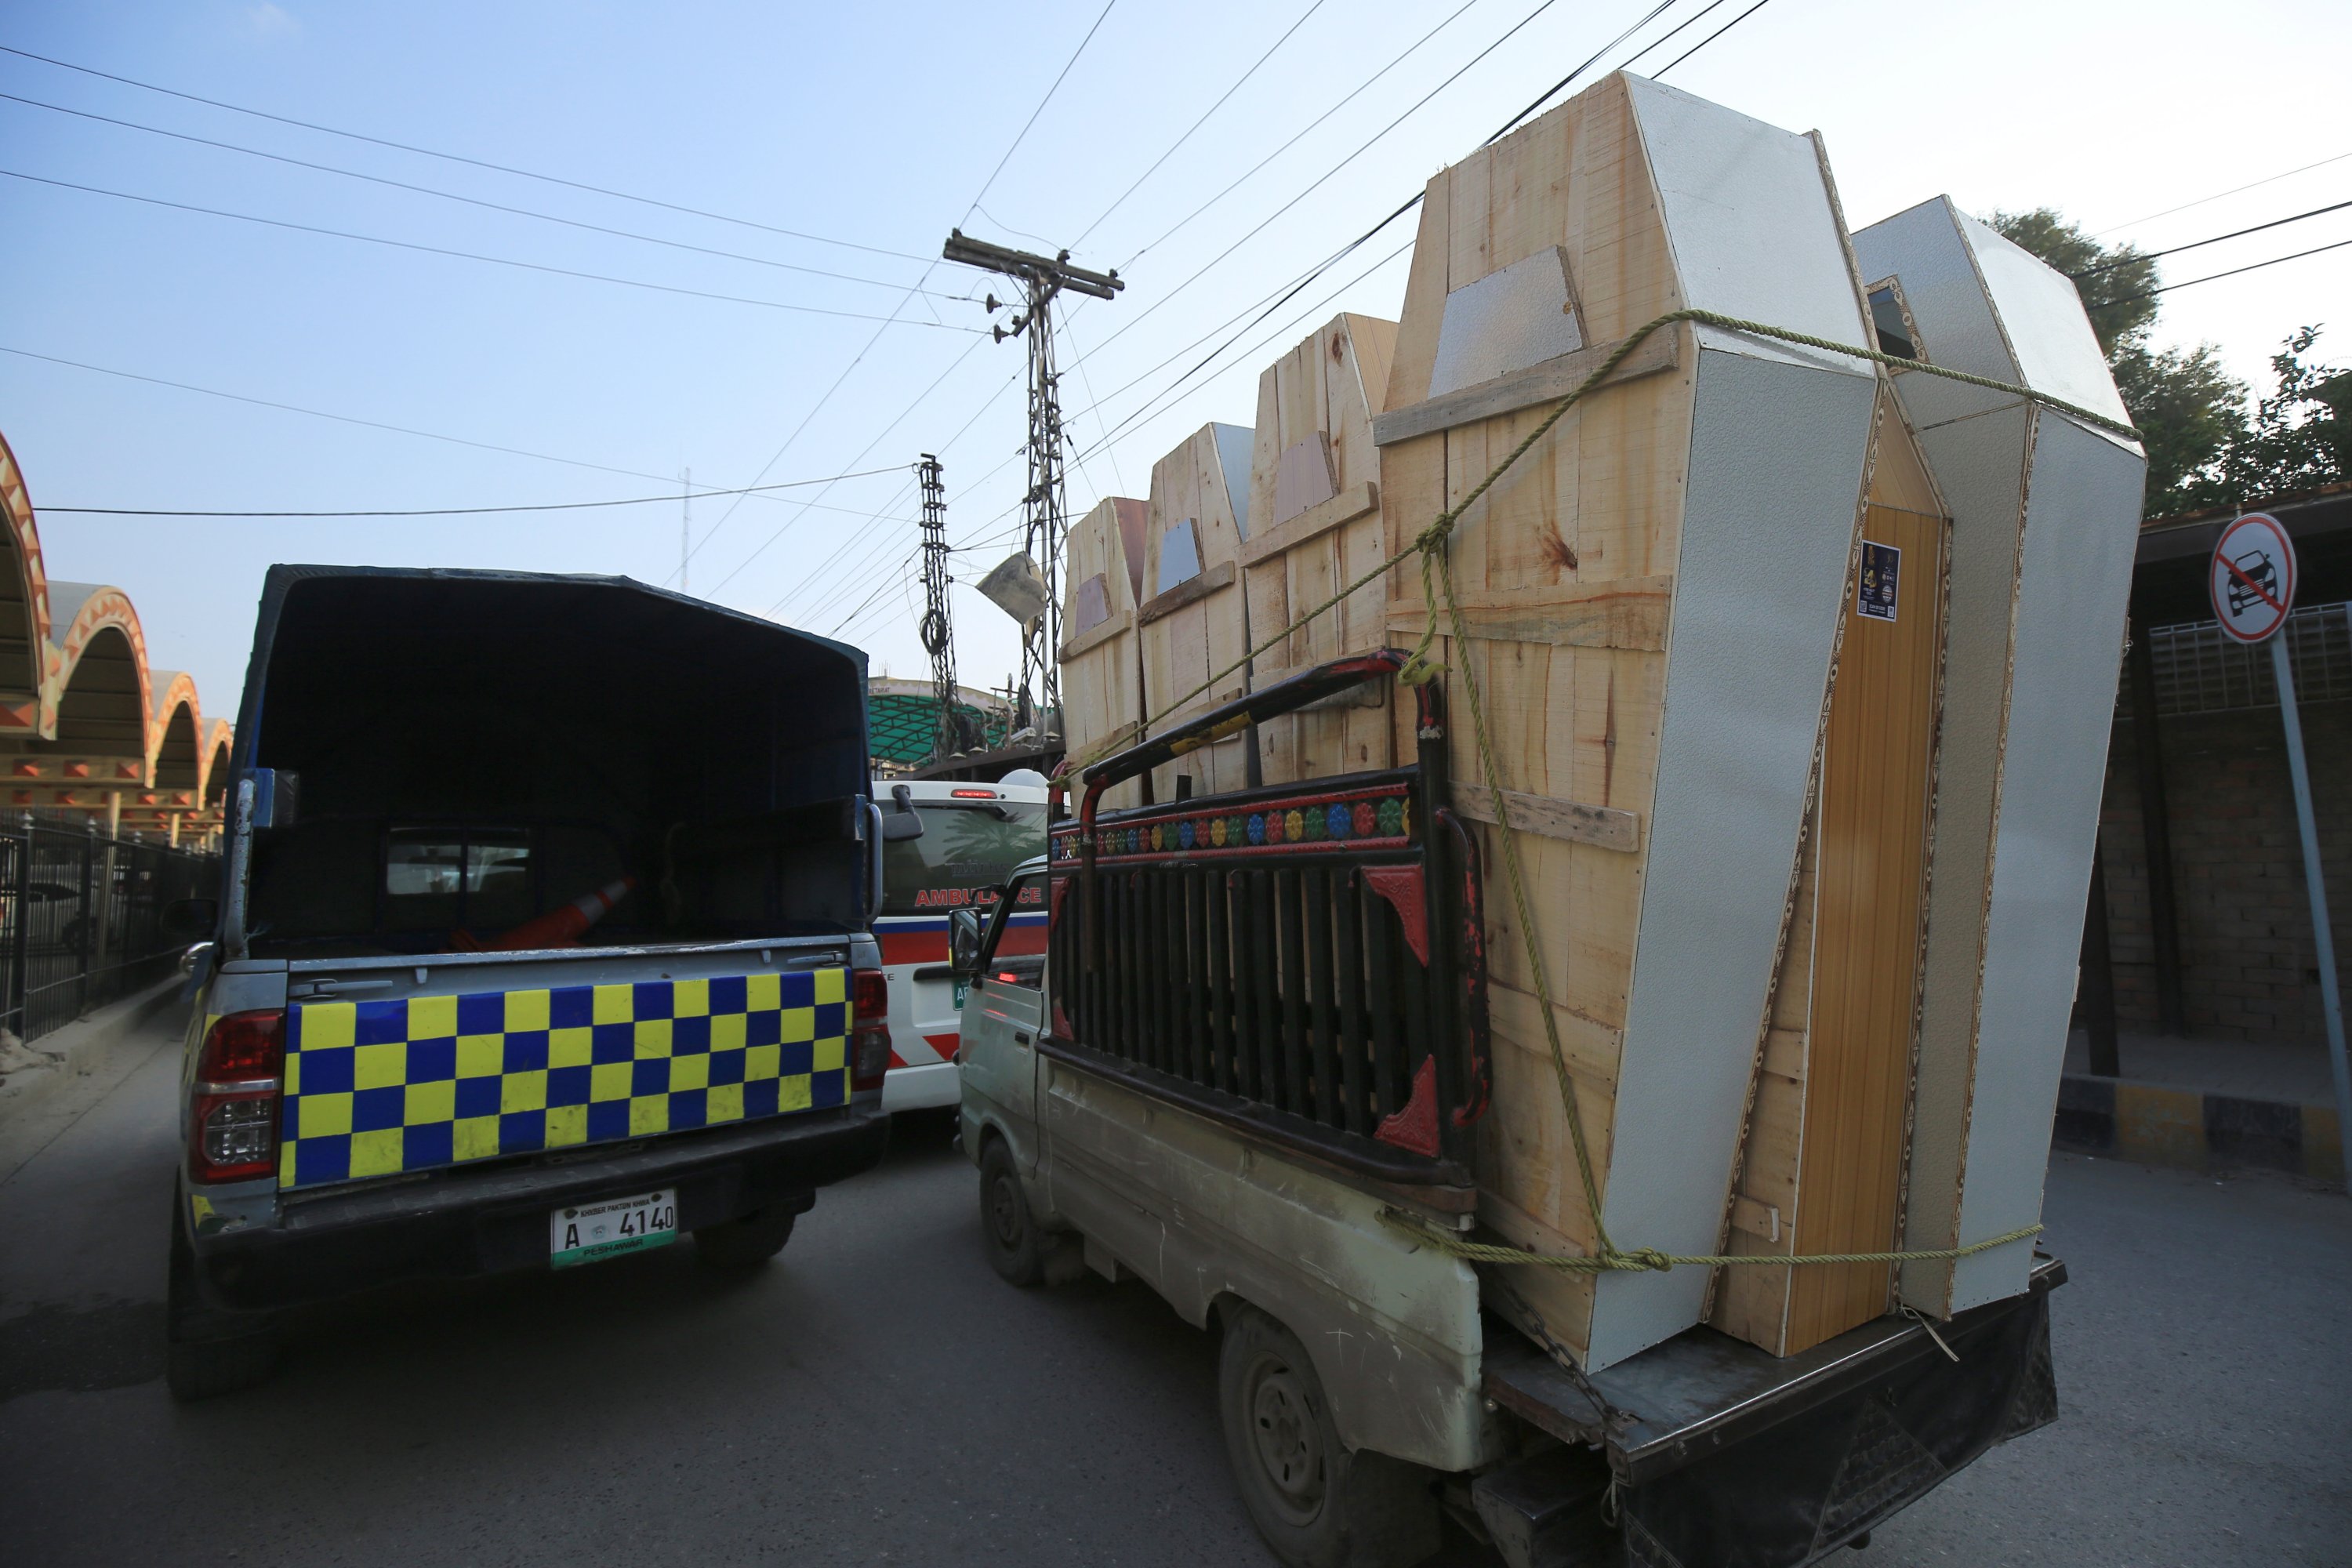 Coffins are transported to the scene of a blast at a Mosque, in Peshawar, Pakistan, Jan. 30, 2023. (EPA Photo)